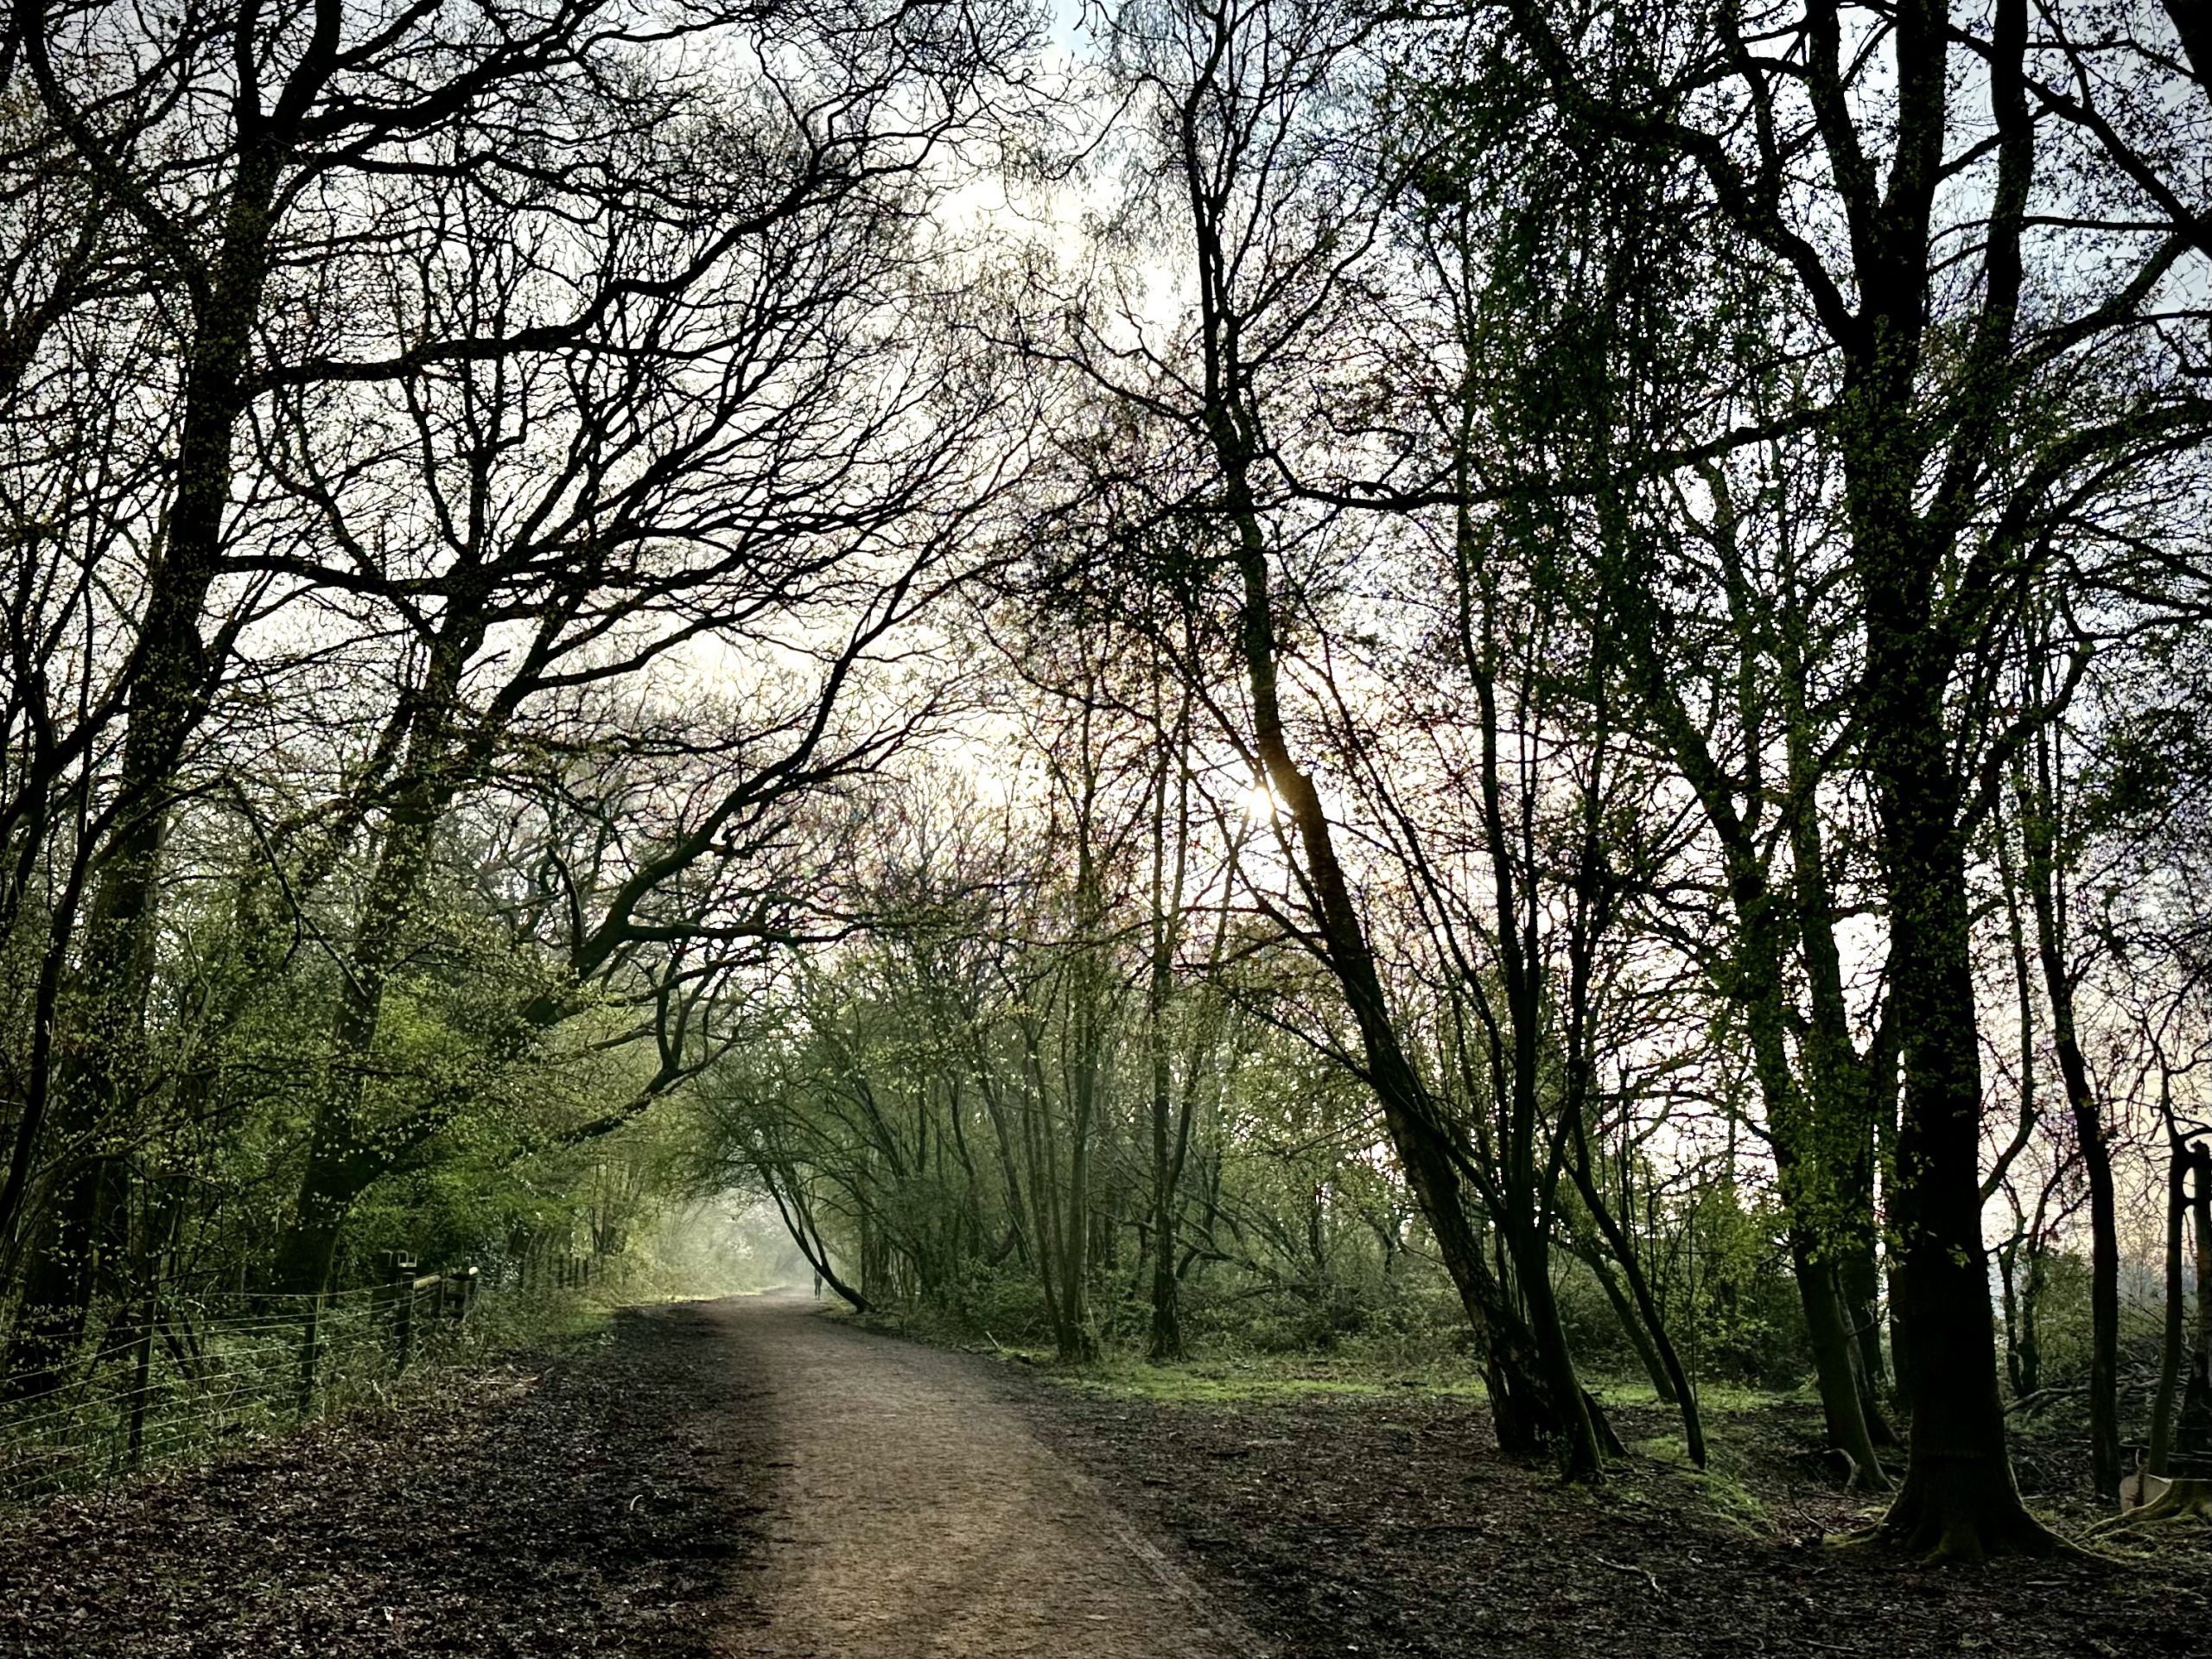 Day 109.4 – Reigate Hill